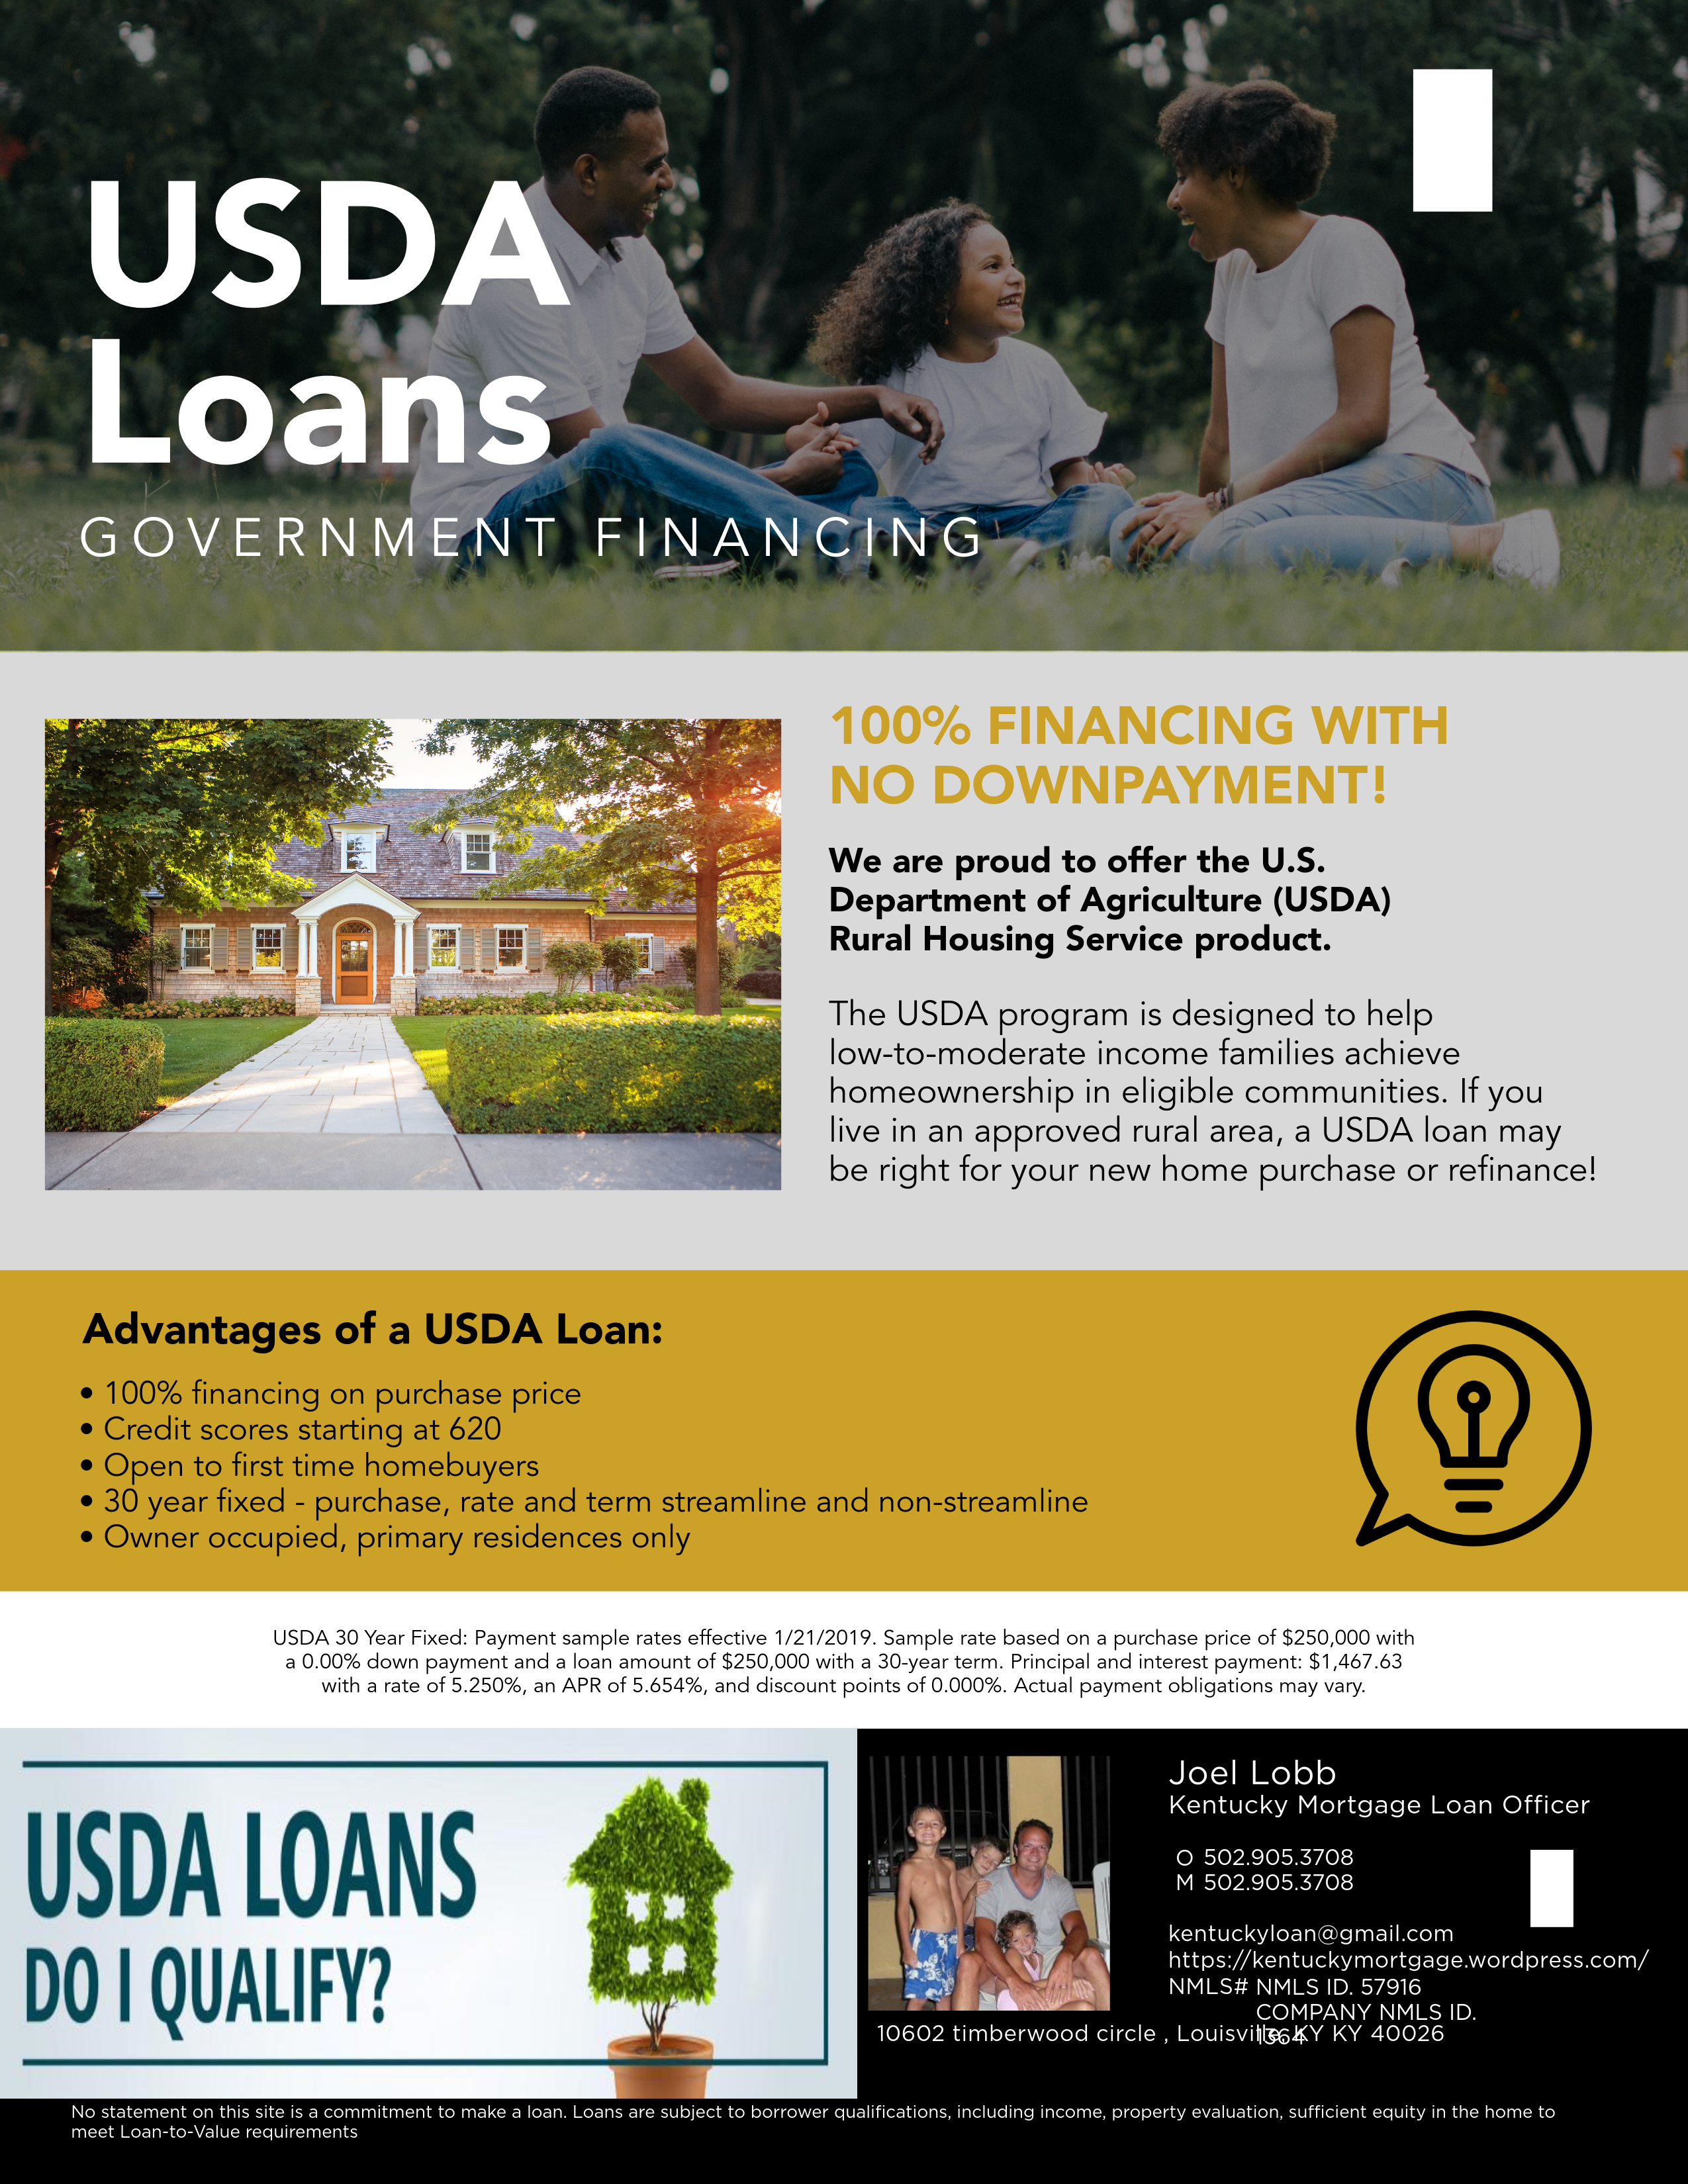 Joel Lobb Mortgage Loan Officer Individual NMLS ID #57916 American Mortgage Solutions, Inc. 10602 Timberwood Circle Louisville, KY 40223 Company NMLS ID #1364 click here for directions to our office Text/call: 502-905-3708 fax: 502-327-9119 email: kentuckyloan@gmail.com https://www.mylouisvillekentuckymortgage.com/